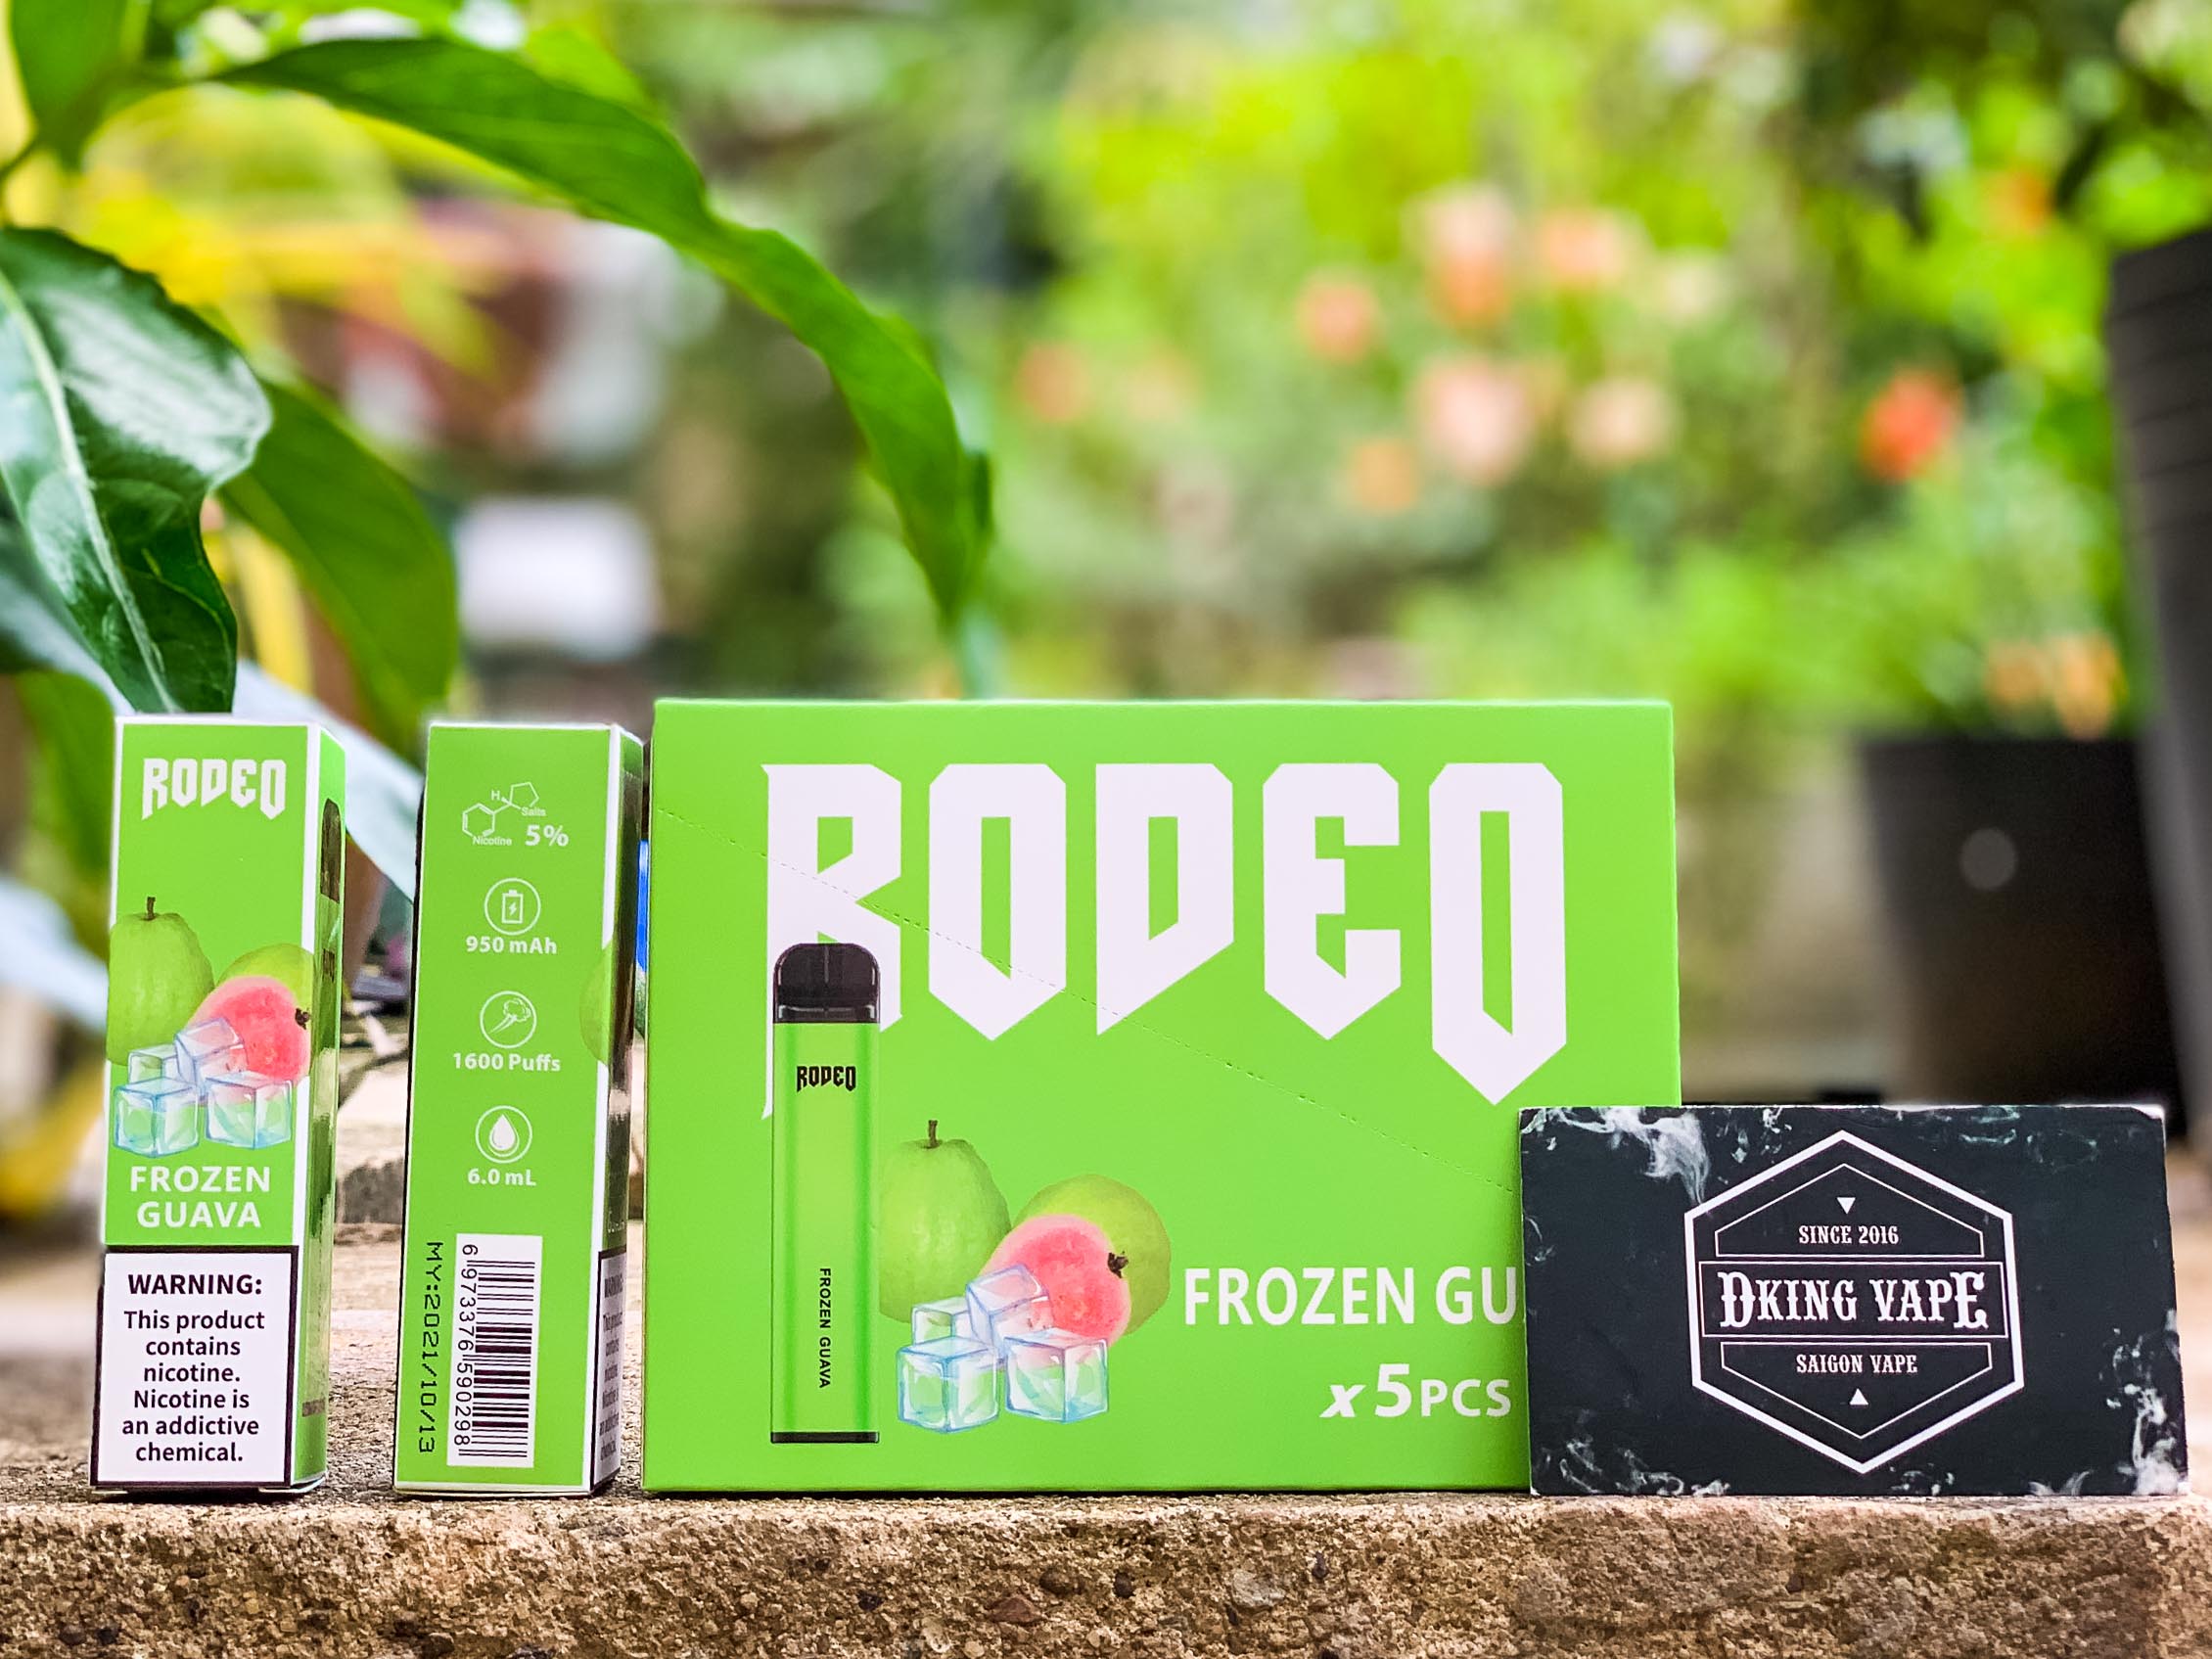 Rodeo 1600 hơi Frozen Guava Ice 